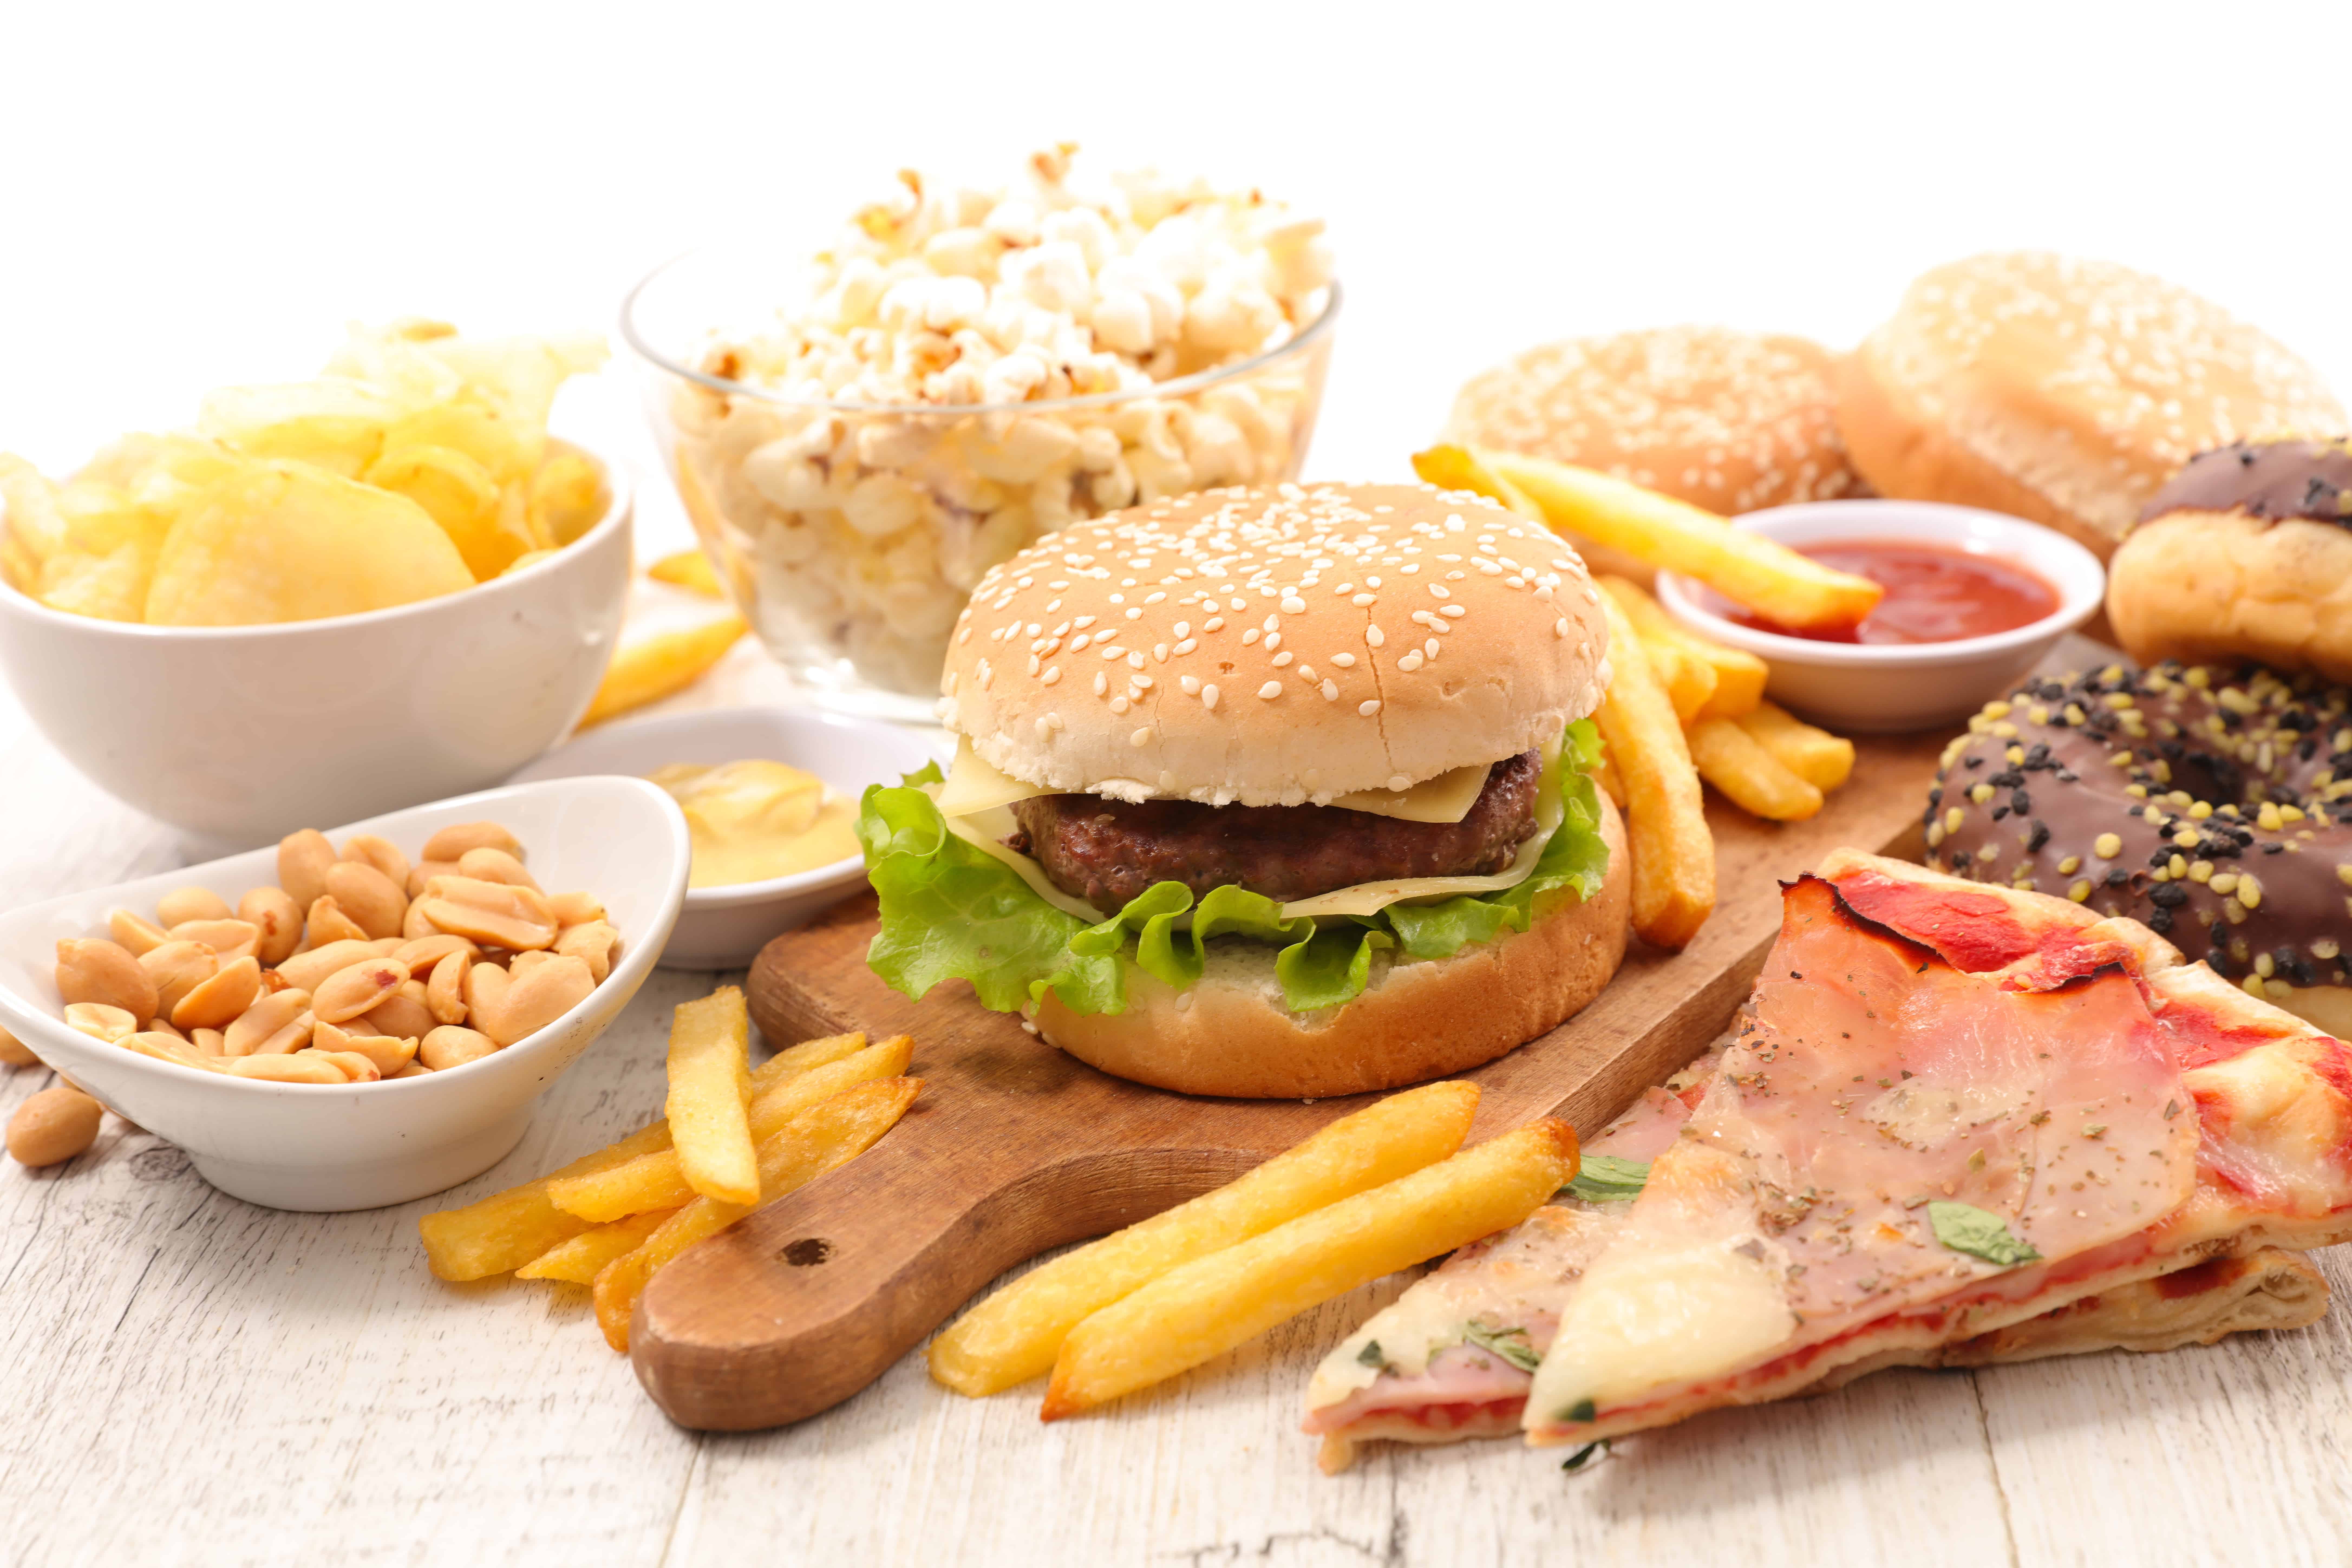 selection of high carbohydrate junk foods pizza chips burgers french fries